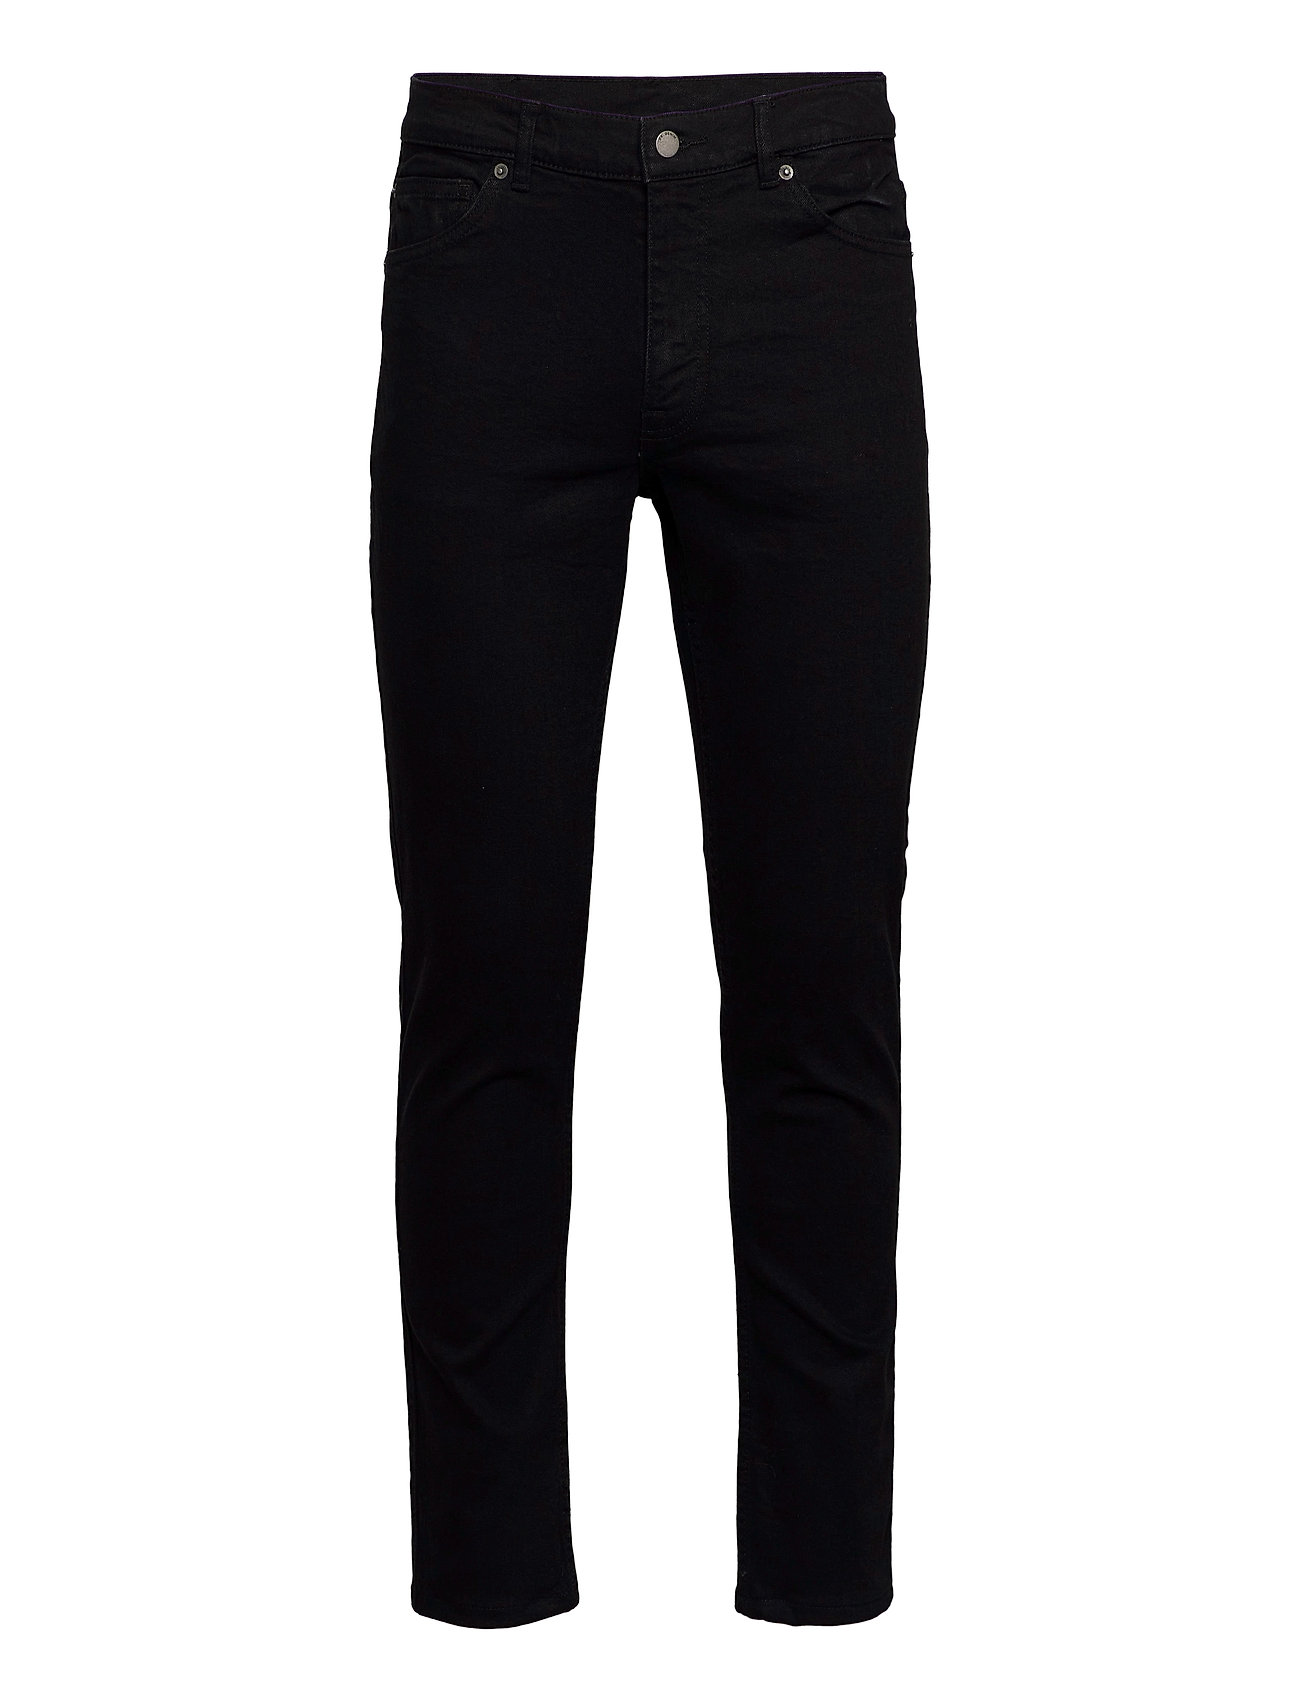 black shaded jeans